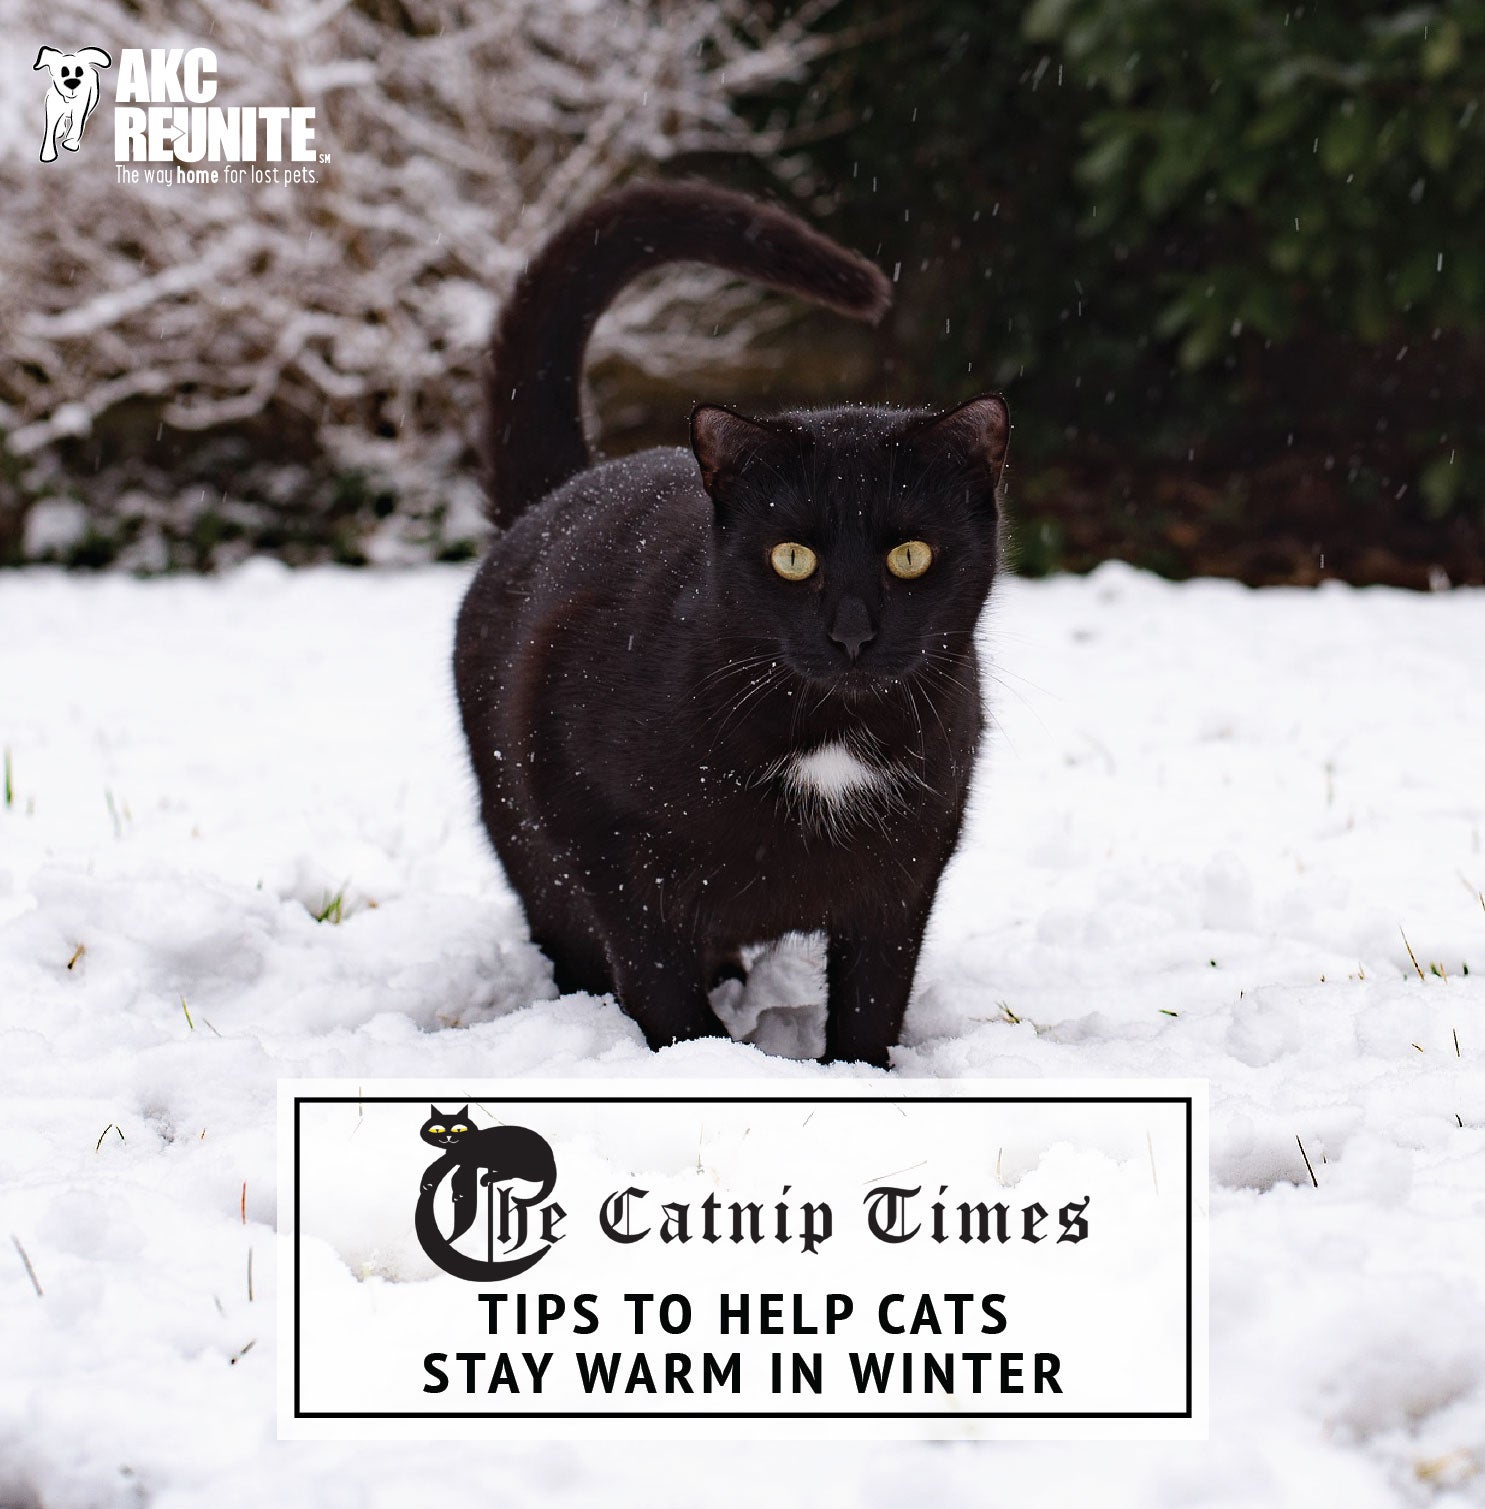 Tips to Help Cats Stay Warm in Winter | AKC Reuntite & The Catnip Times